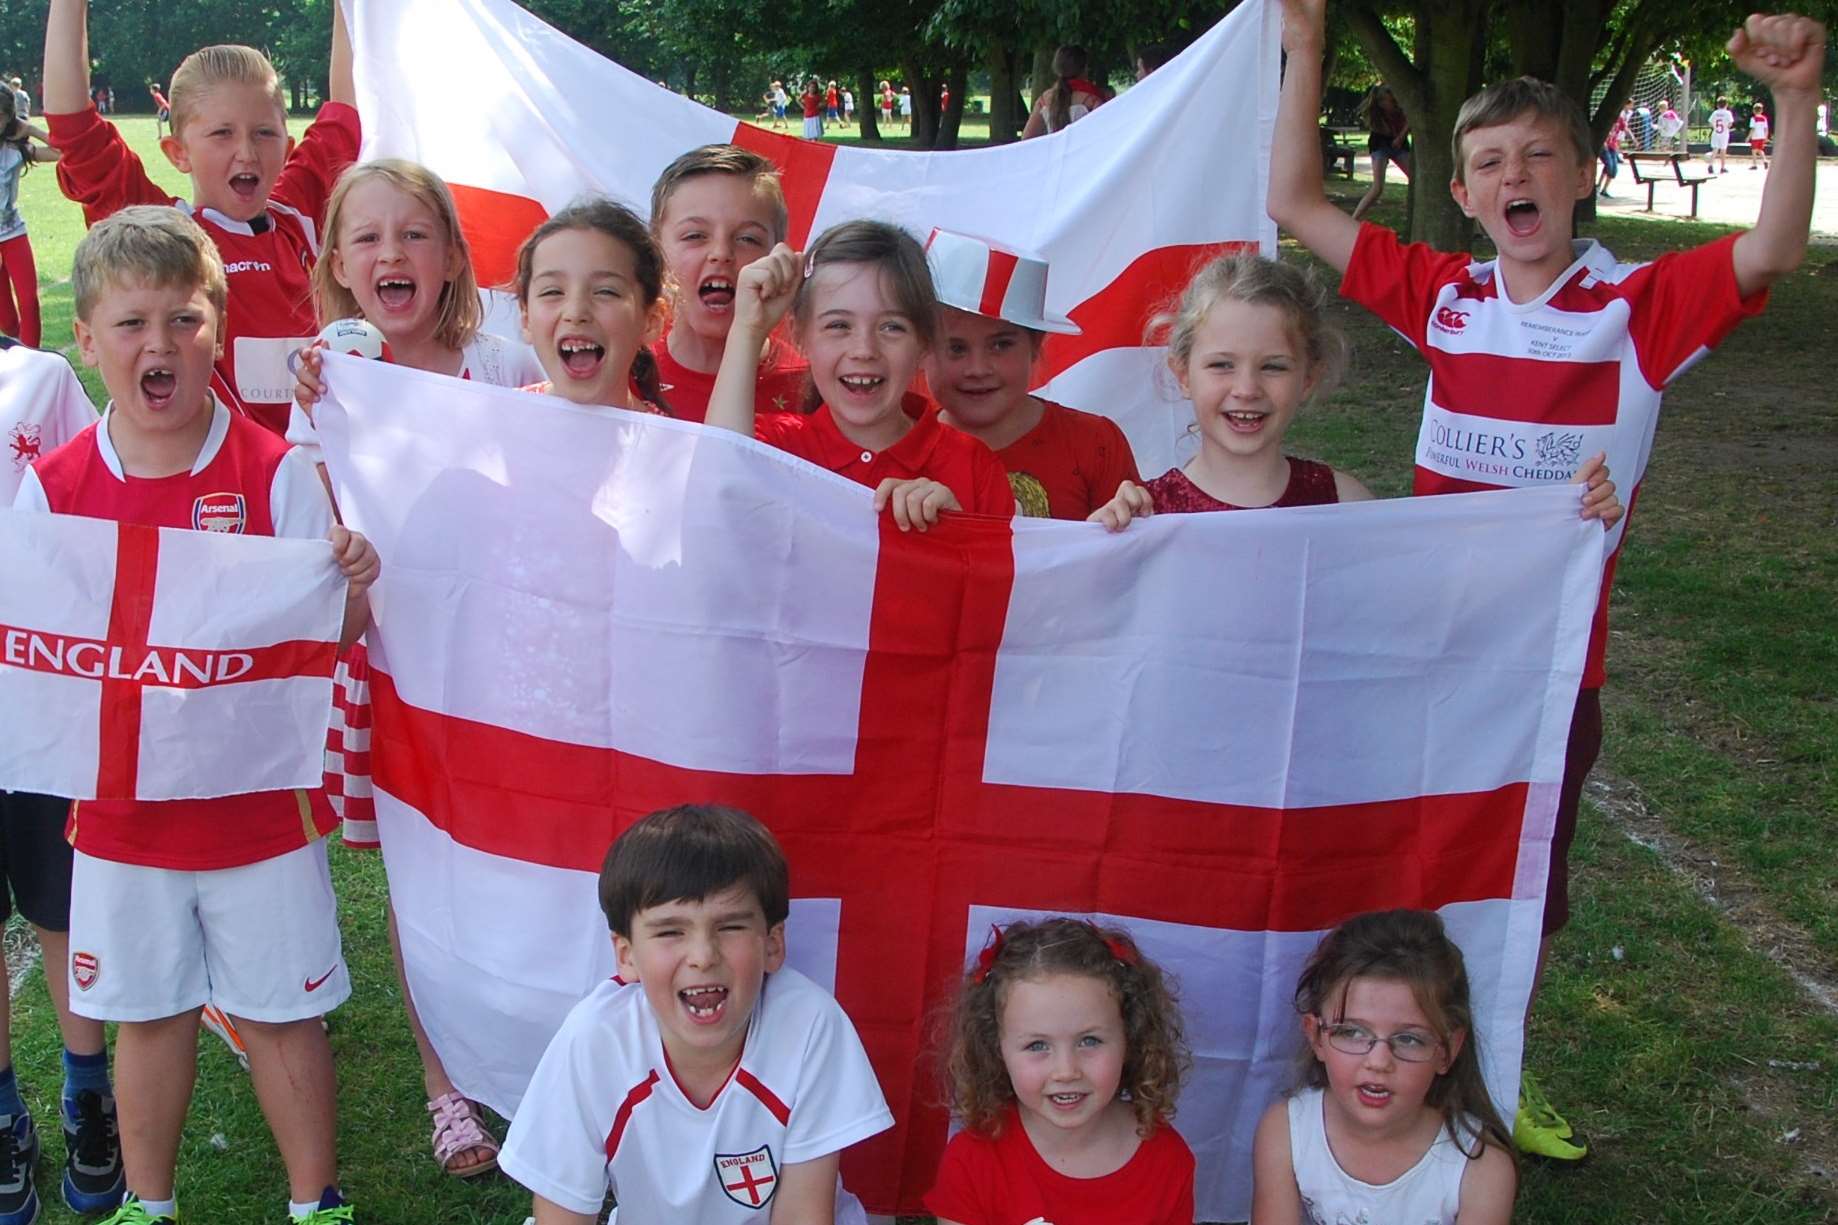 Pupils at Wateringbury Primary School still cheering their team on during their red and white non-uniform day